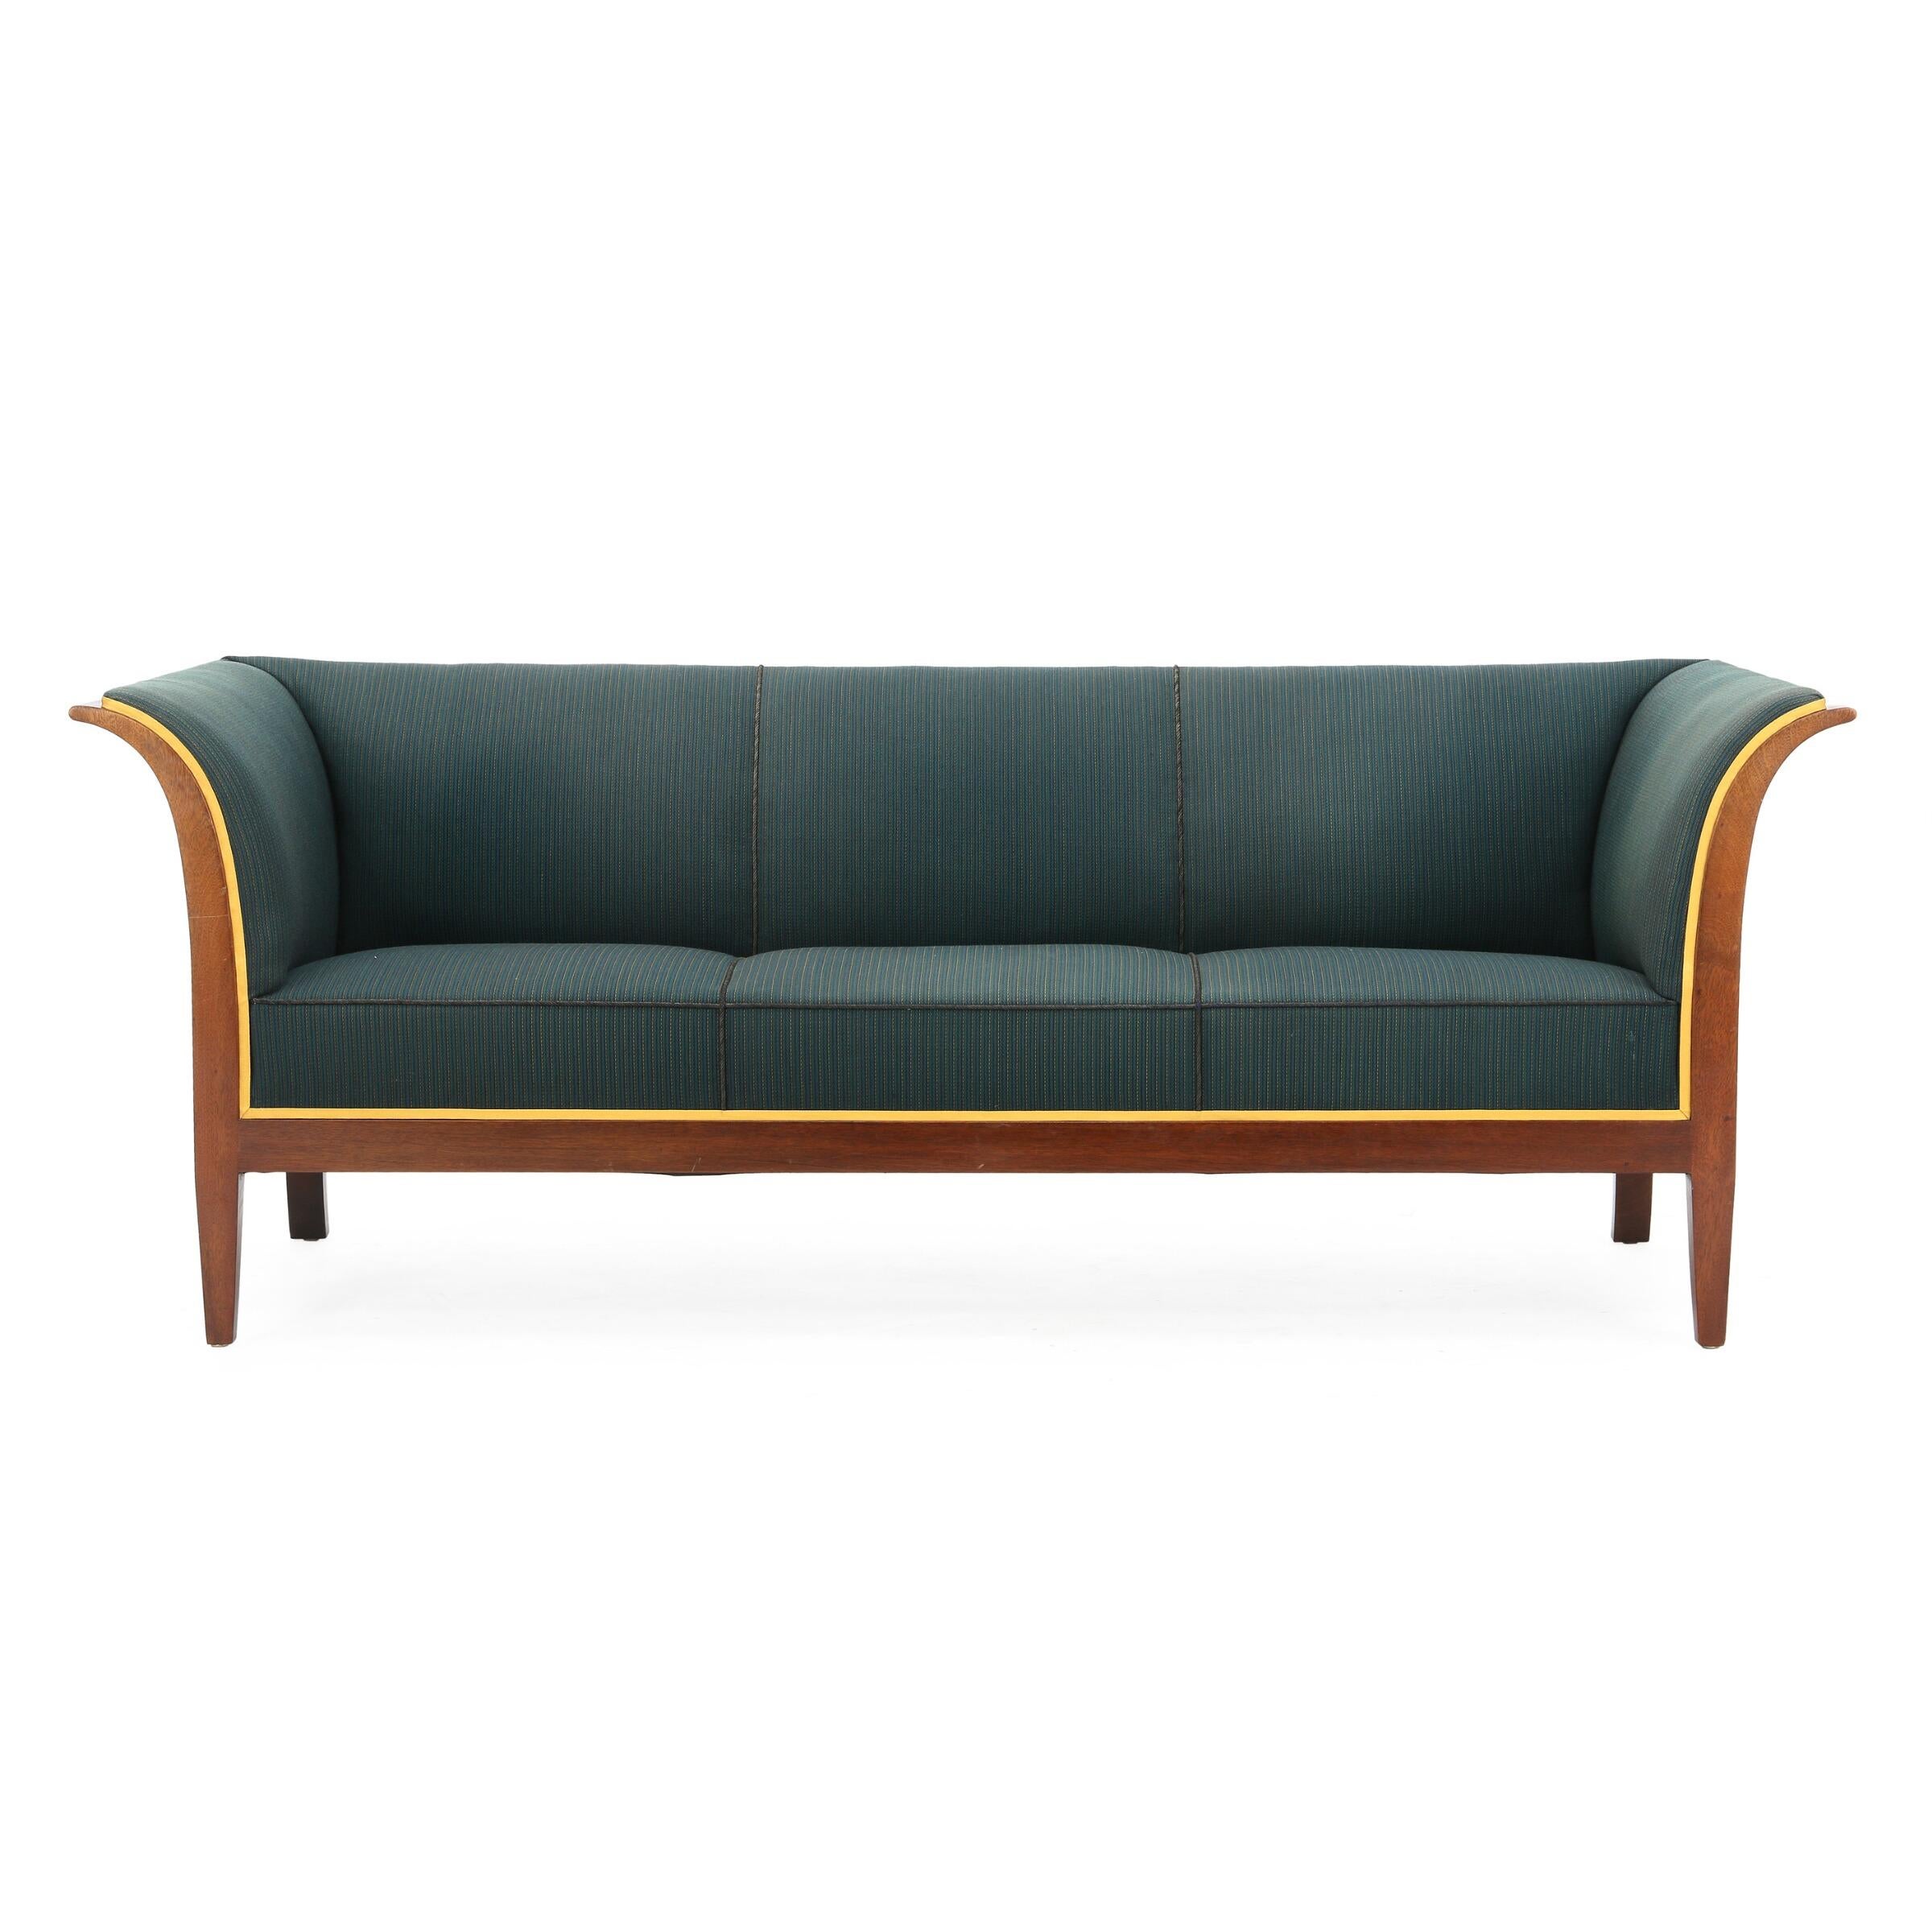 Neoclassical style freestanding three-seat sofa with mahogany frame. Danish modern, circa 1950s. Sides, seat and back upholstered with blue, yellow and green striped wool. Yellow edgings. Made by cabinetmaker Frits Henningsen.